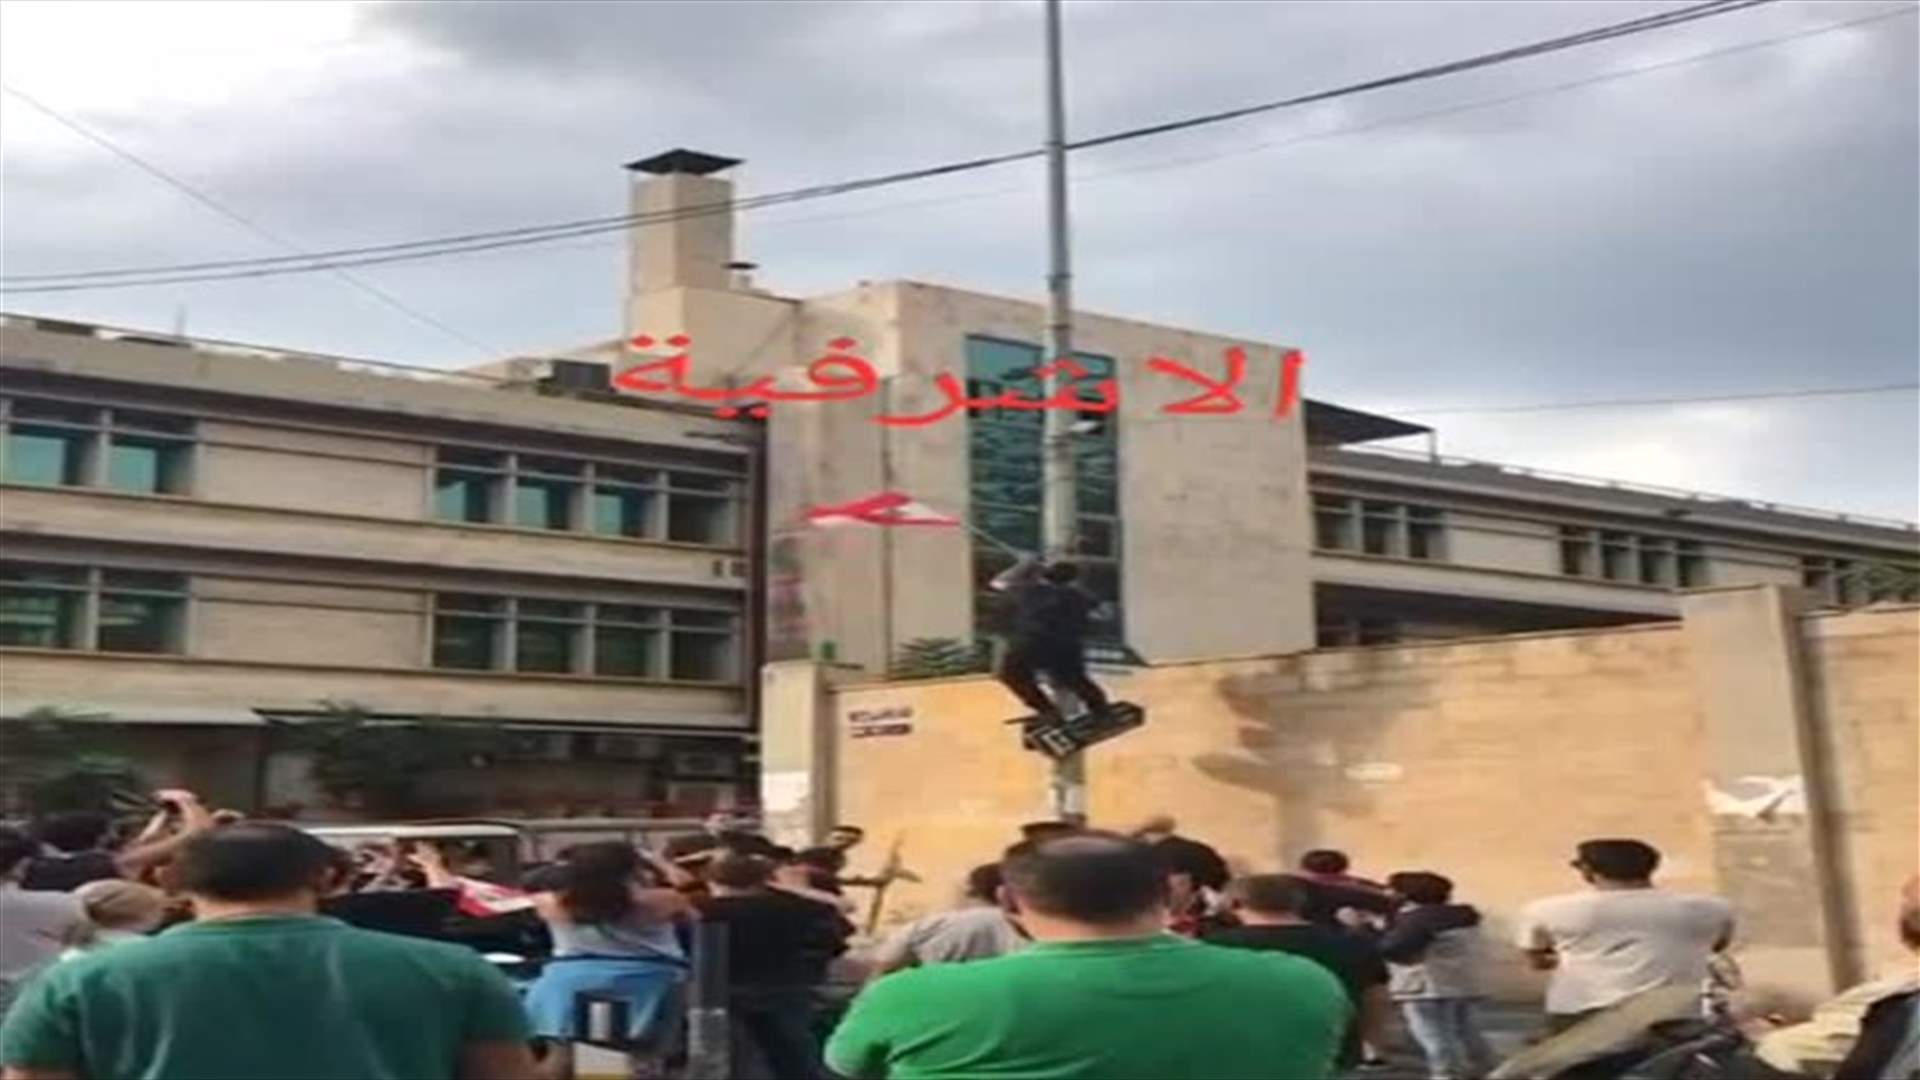 Protester removes LF flag, replaces it with Lebanese flag-[VIDEO]